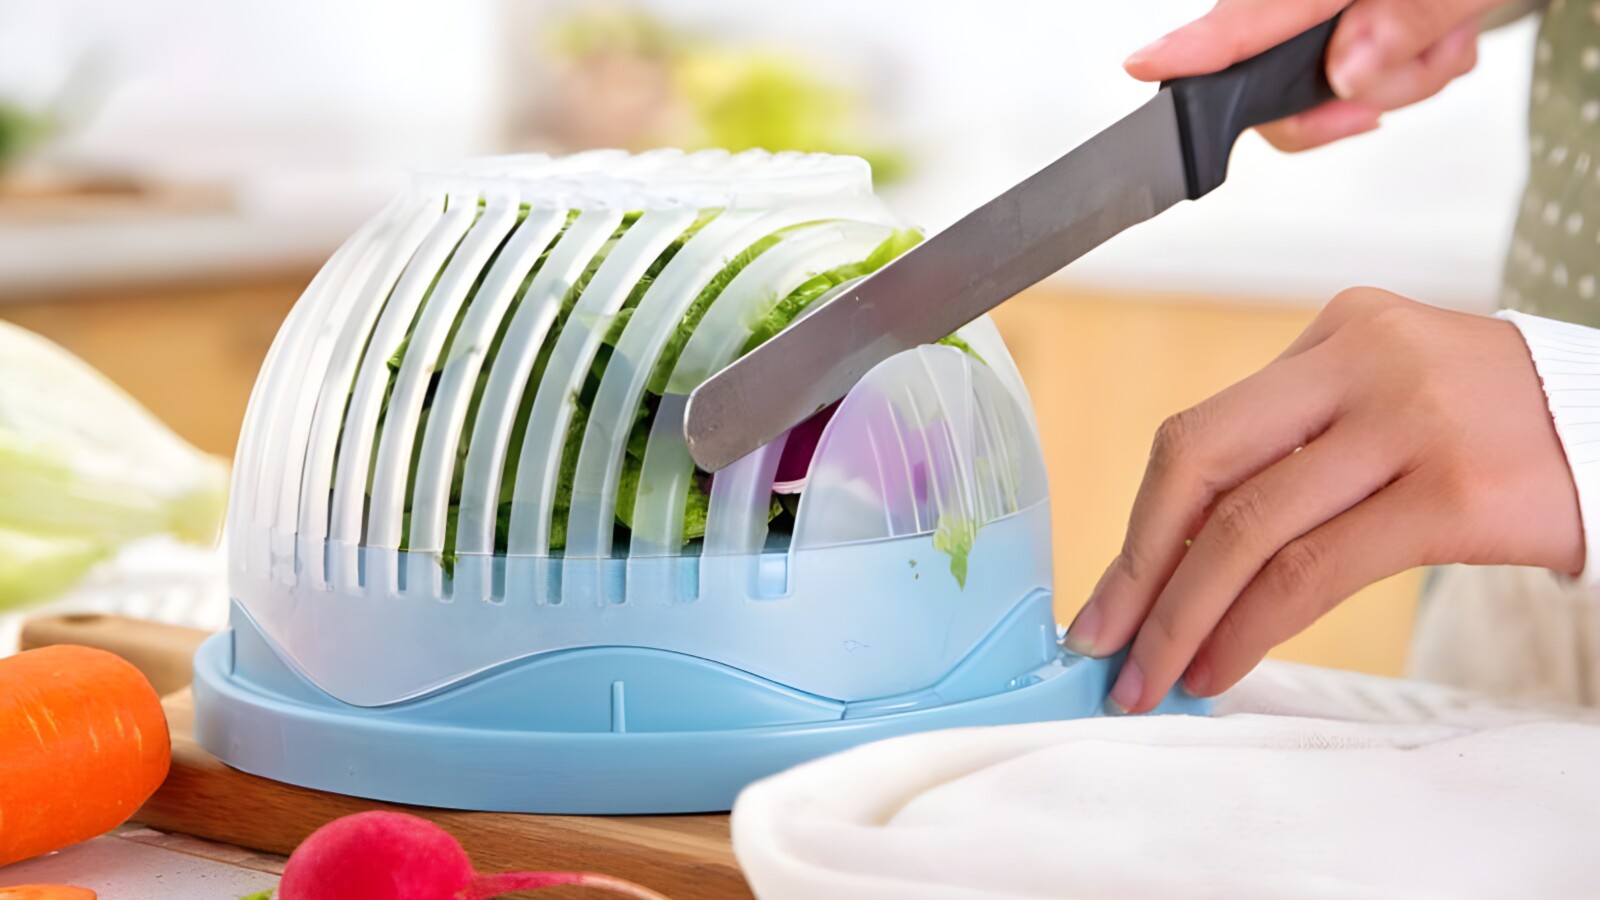 The best way to meal prep is with Fullstar's 6-in-1 Mandoline Slicer 